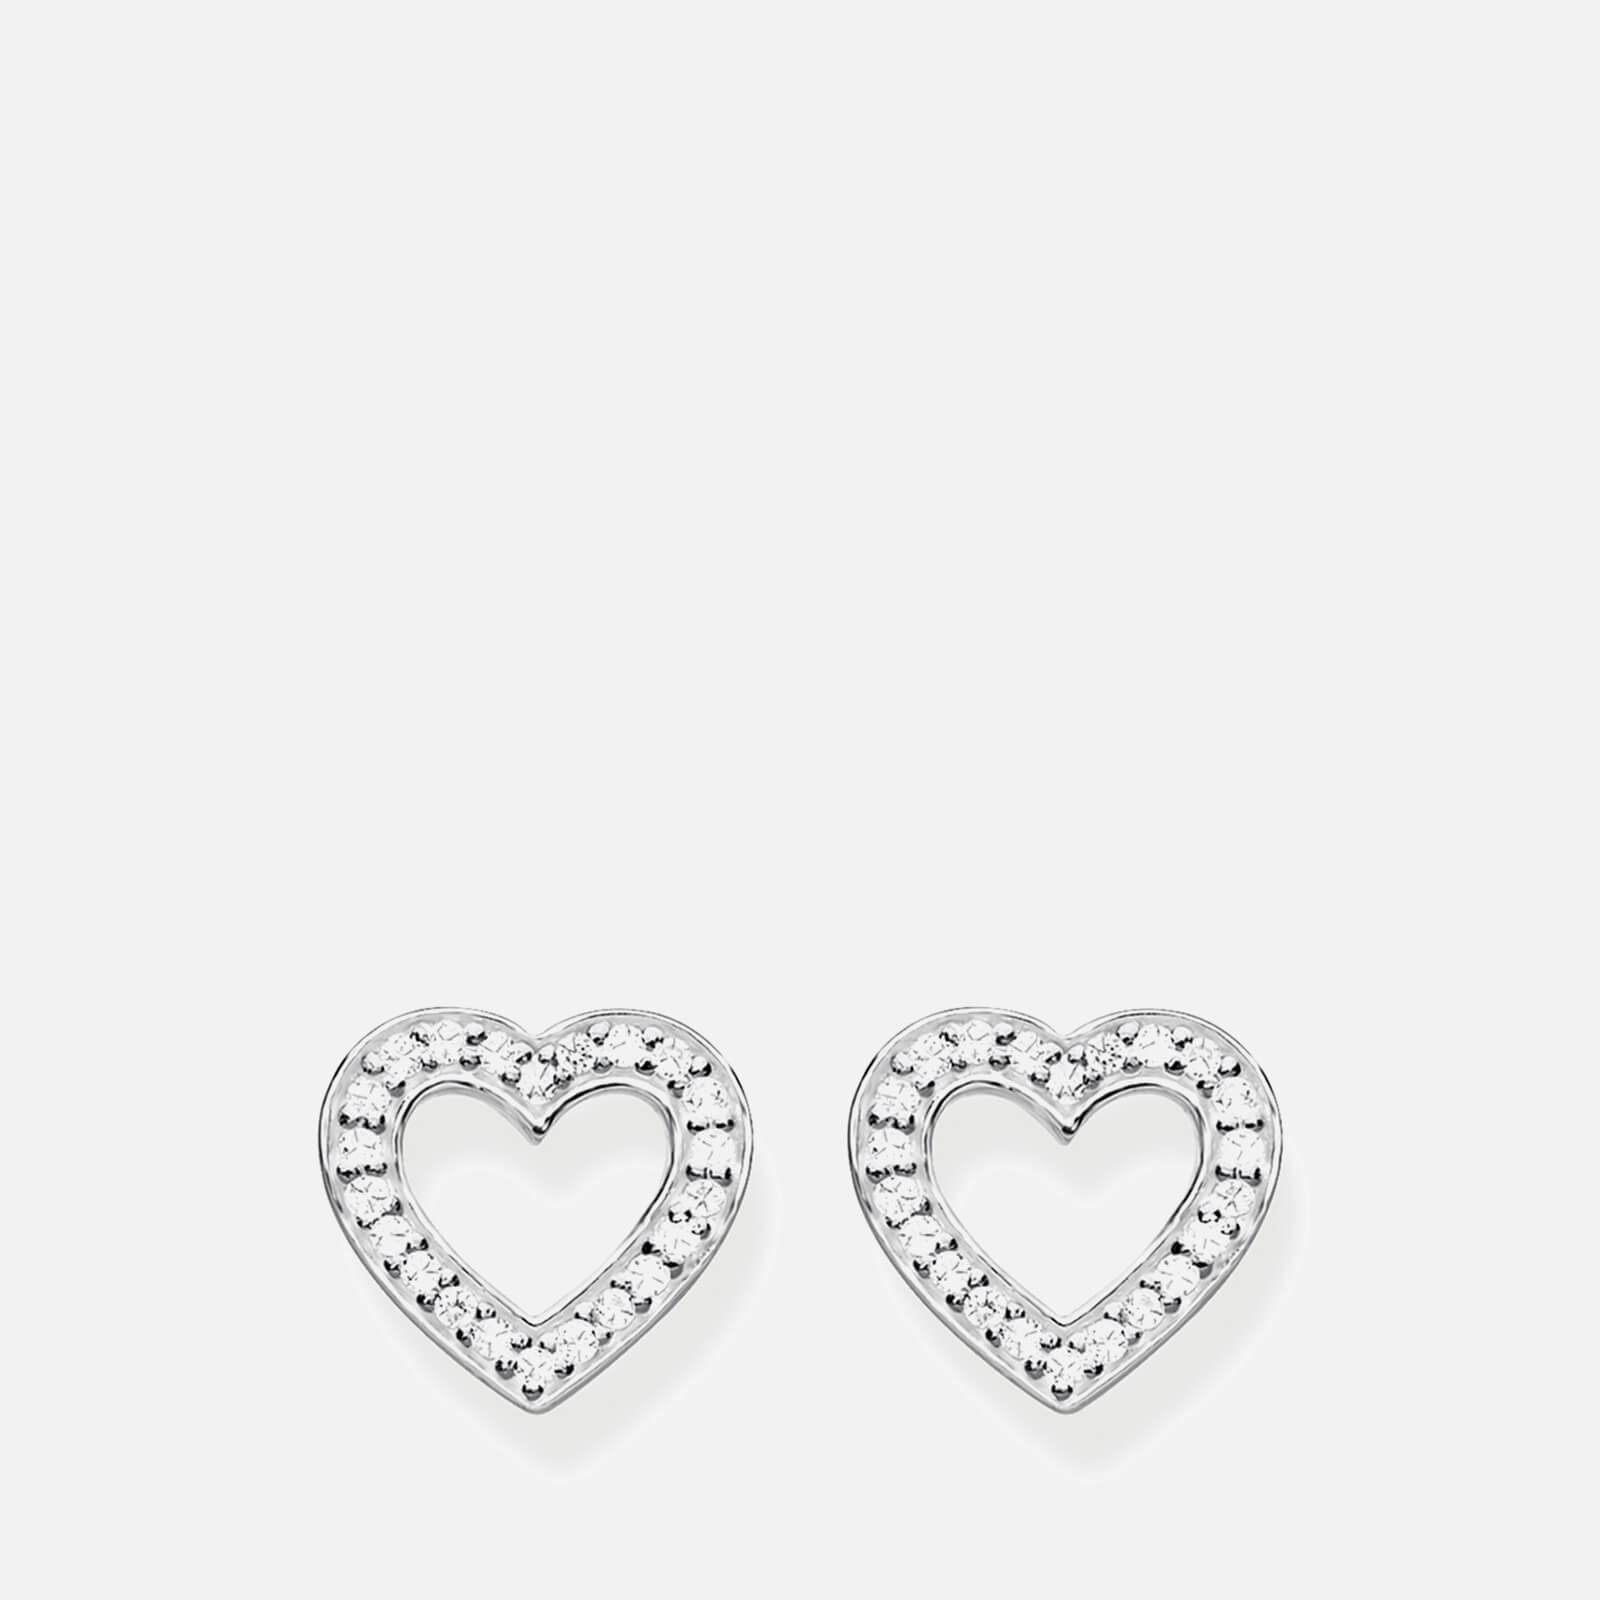 Photos - Other Jewellery Thomas Sabo Heart Sterling Silver Stud Earrings H1945-051-14